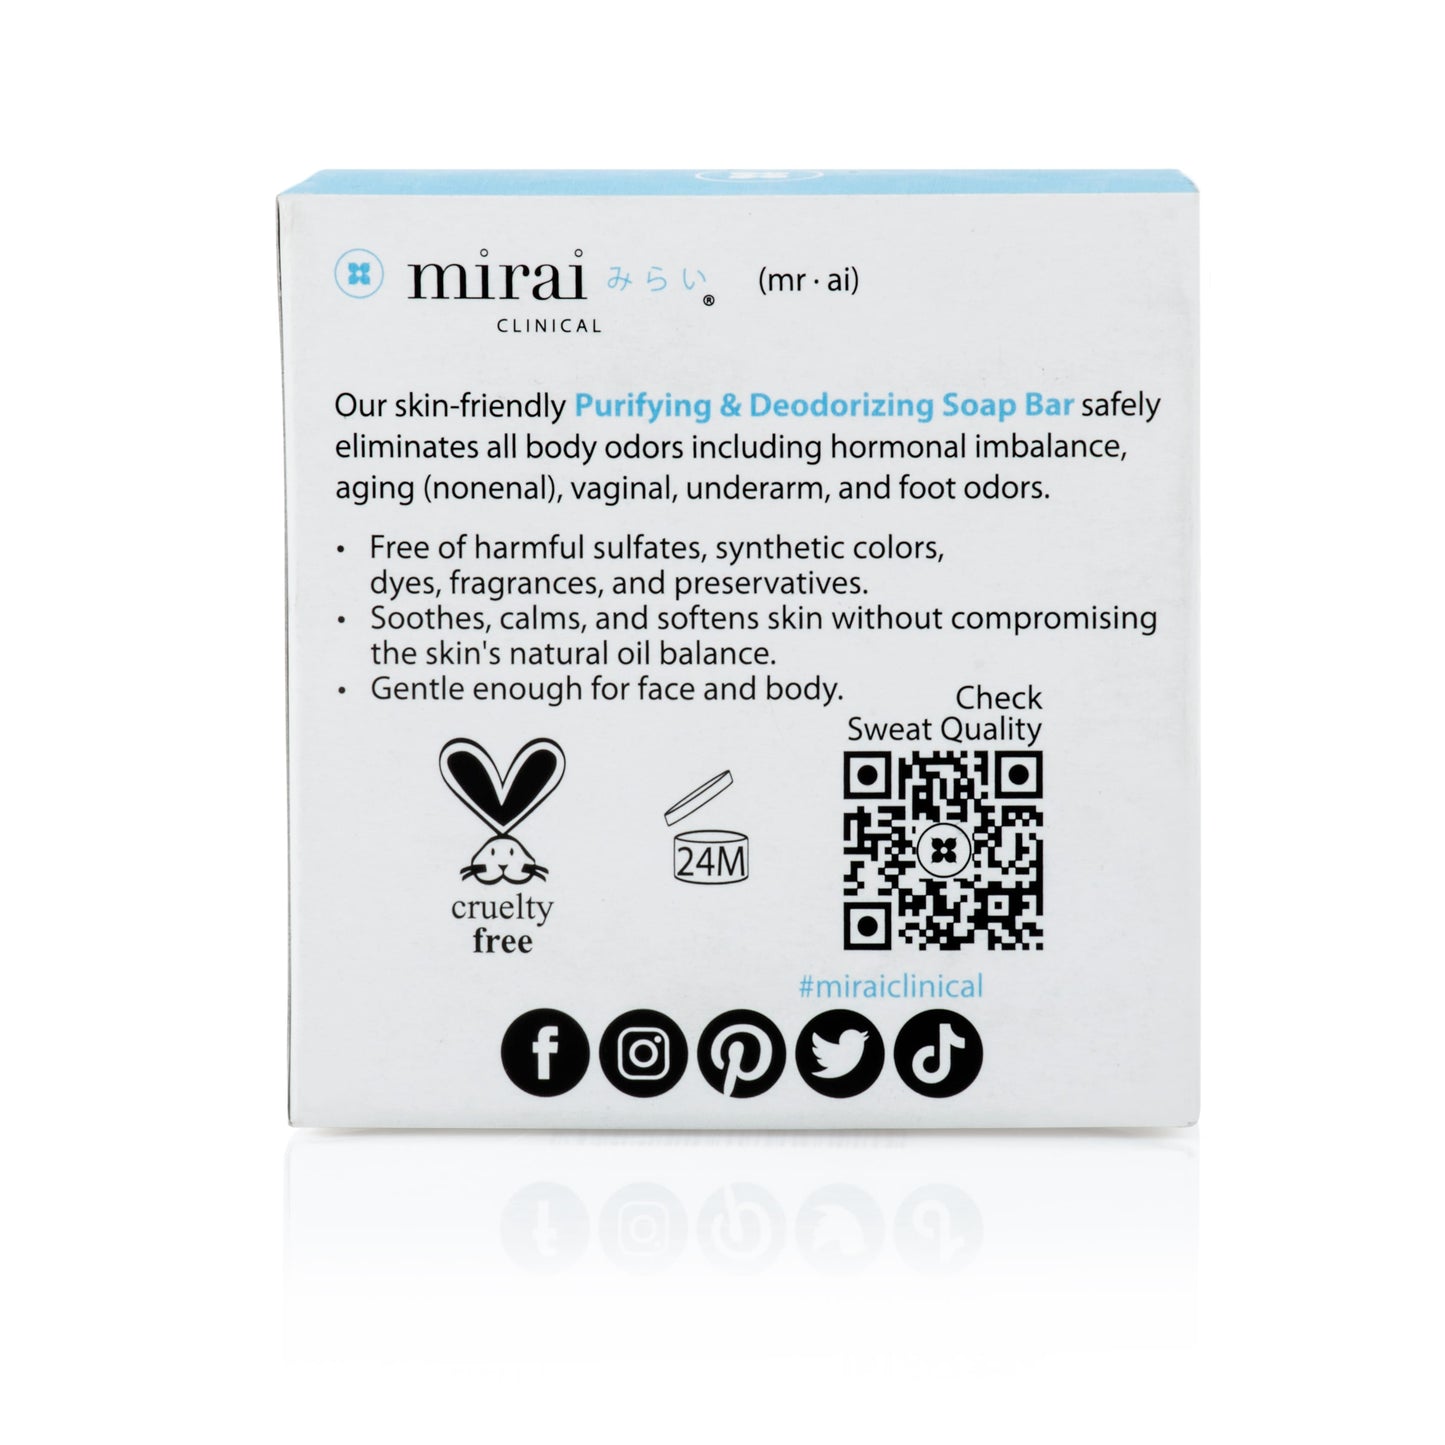 Back view of Mirai Clinical Deodorizing Soap with Persimmon packaging, highlighting ingredient list and usage instructions.